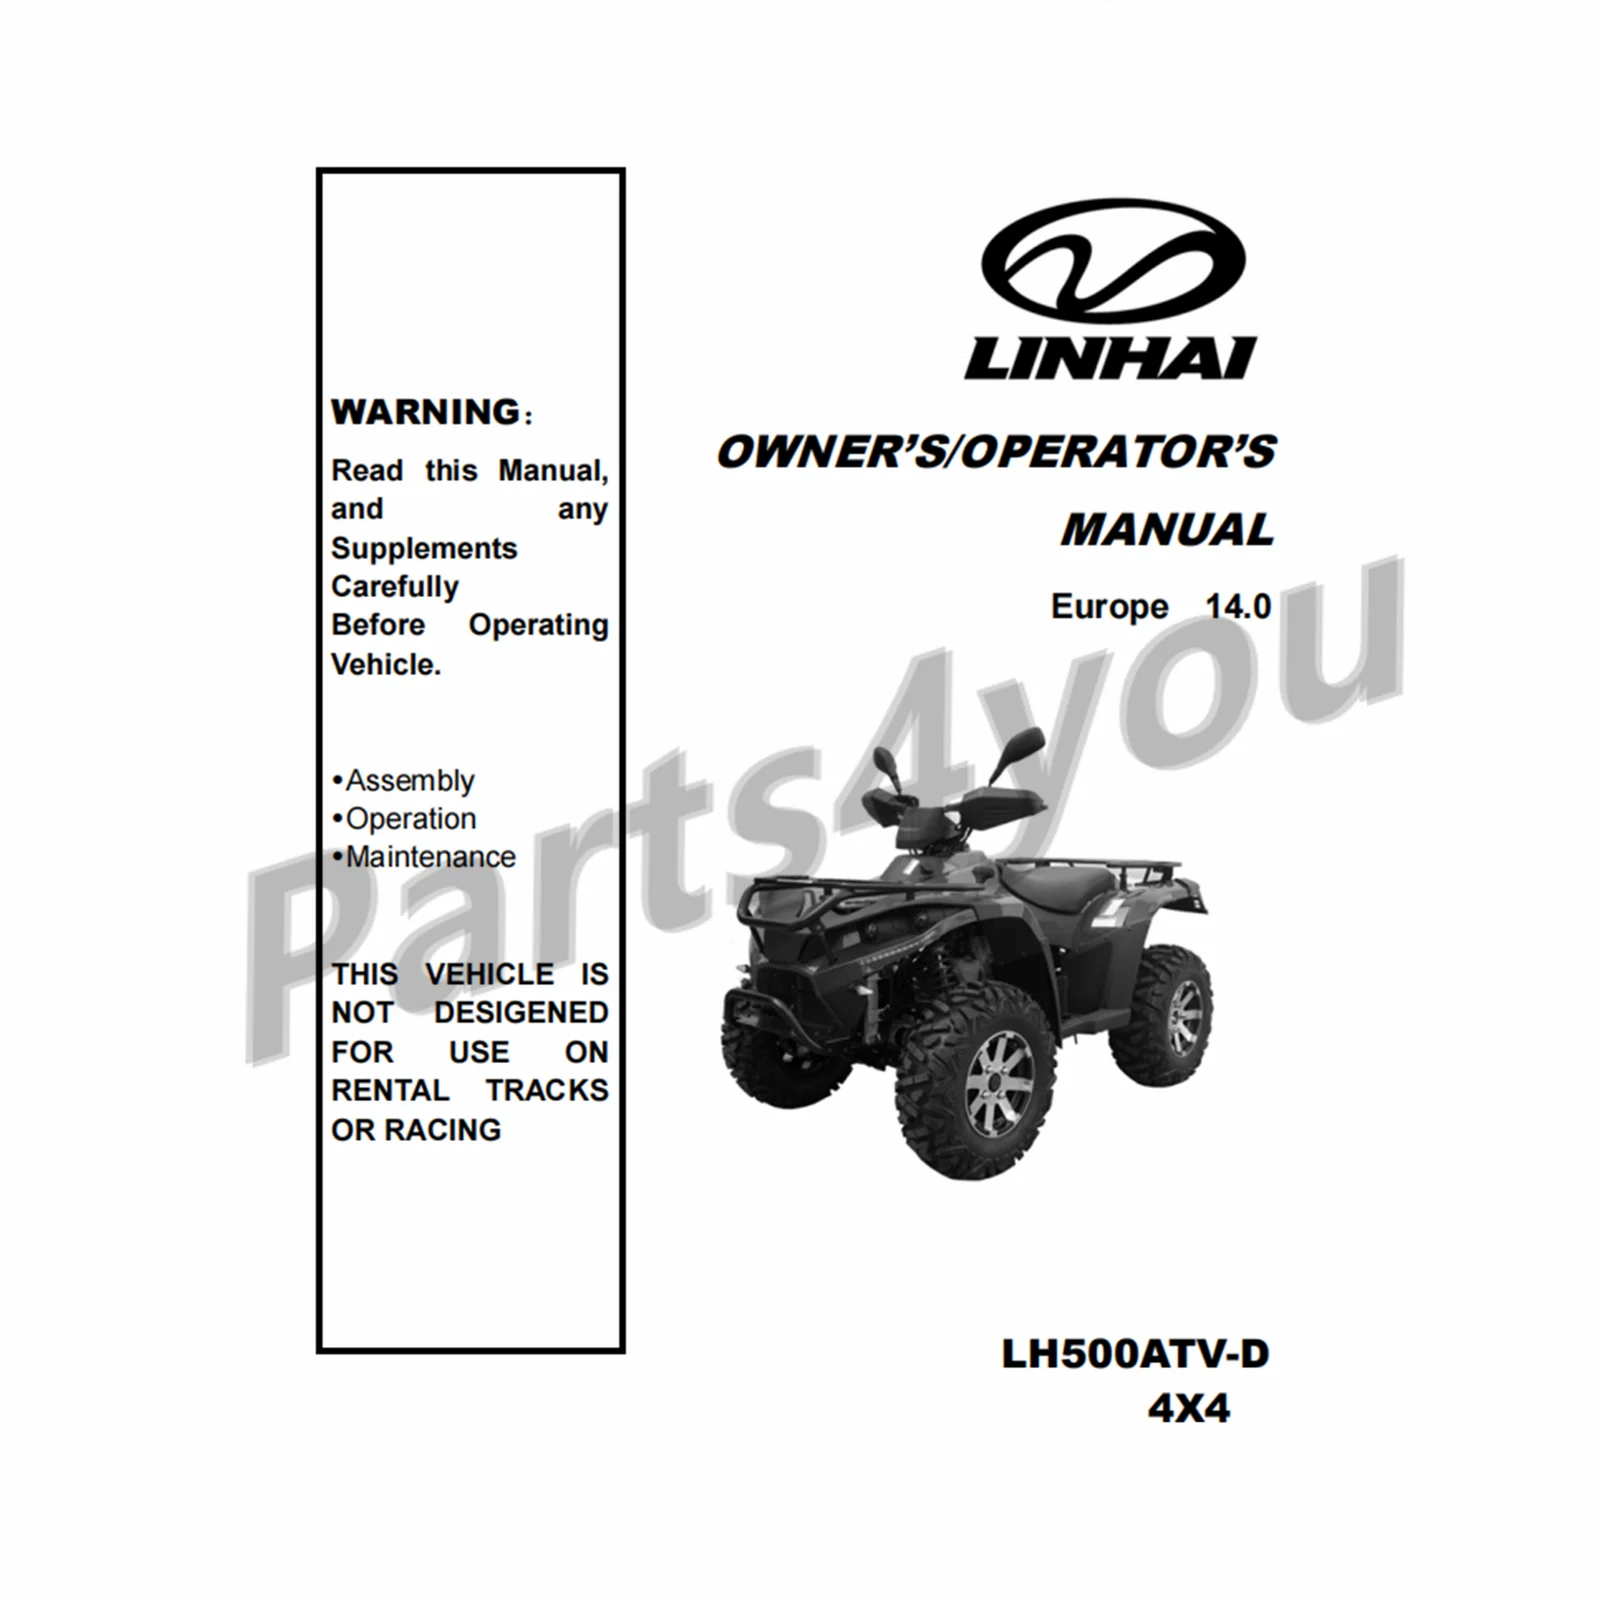 

Linhai 500 ATV LH500ATV-D 4X4 Electric Owner Manual Operator Manual in English Send by Email NOT VEHICLE